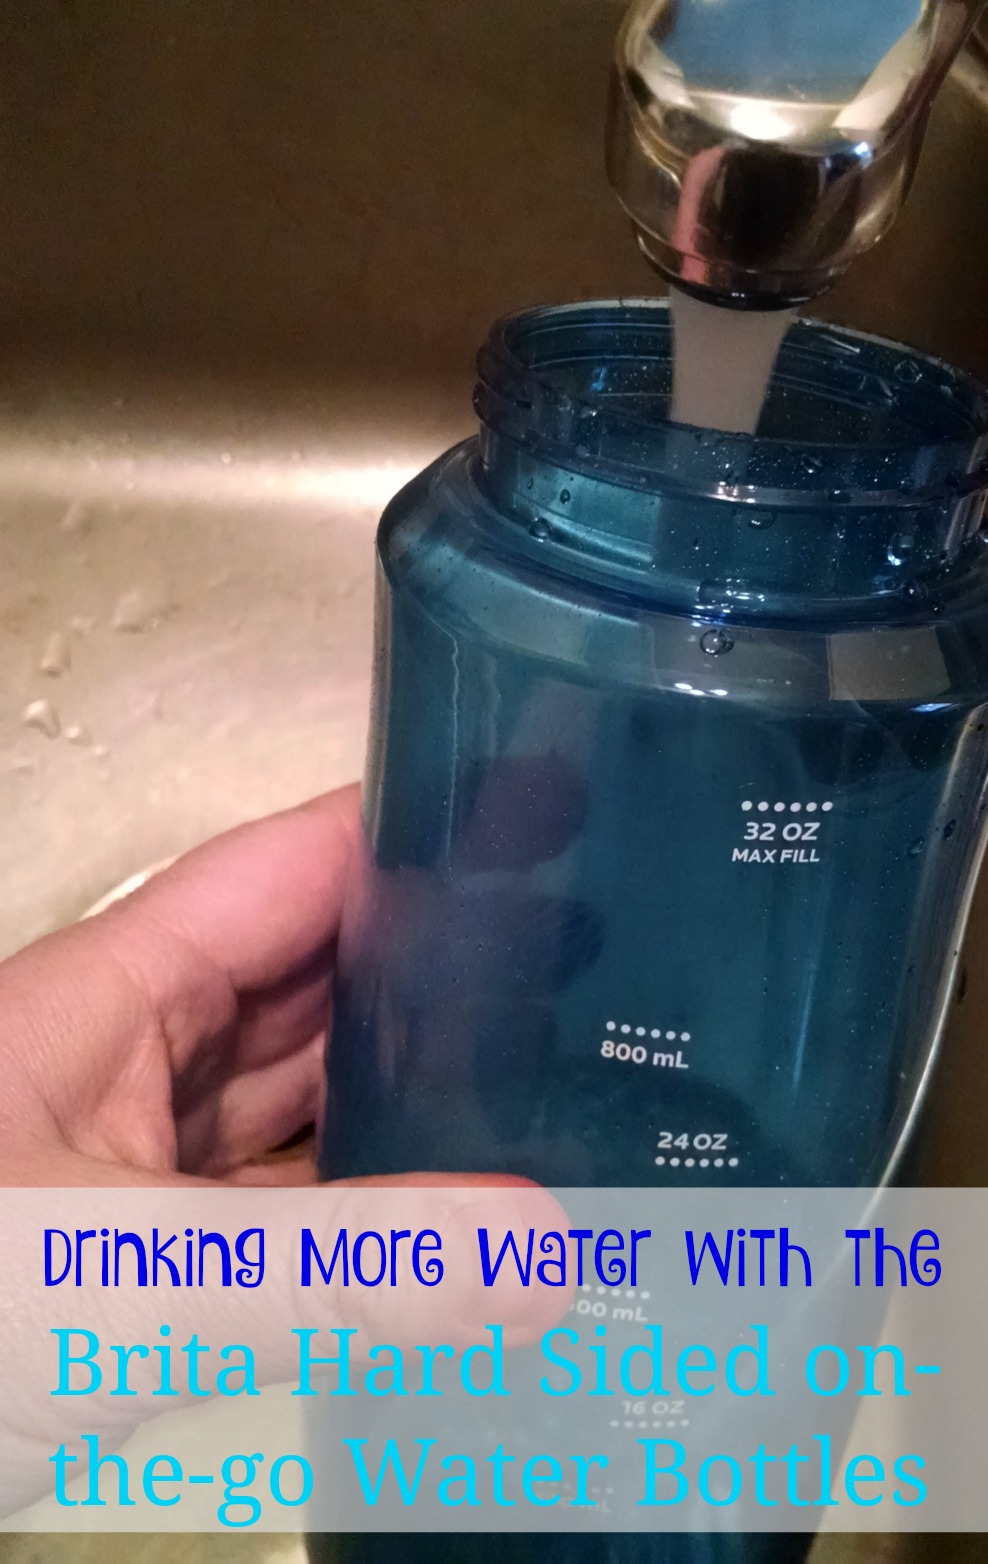 brita water sided hard bottles bottle drinking filter straw easy squeezable launch following